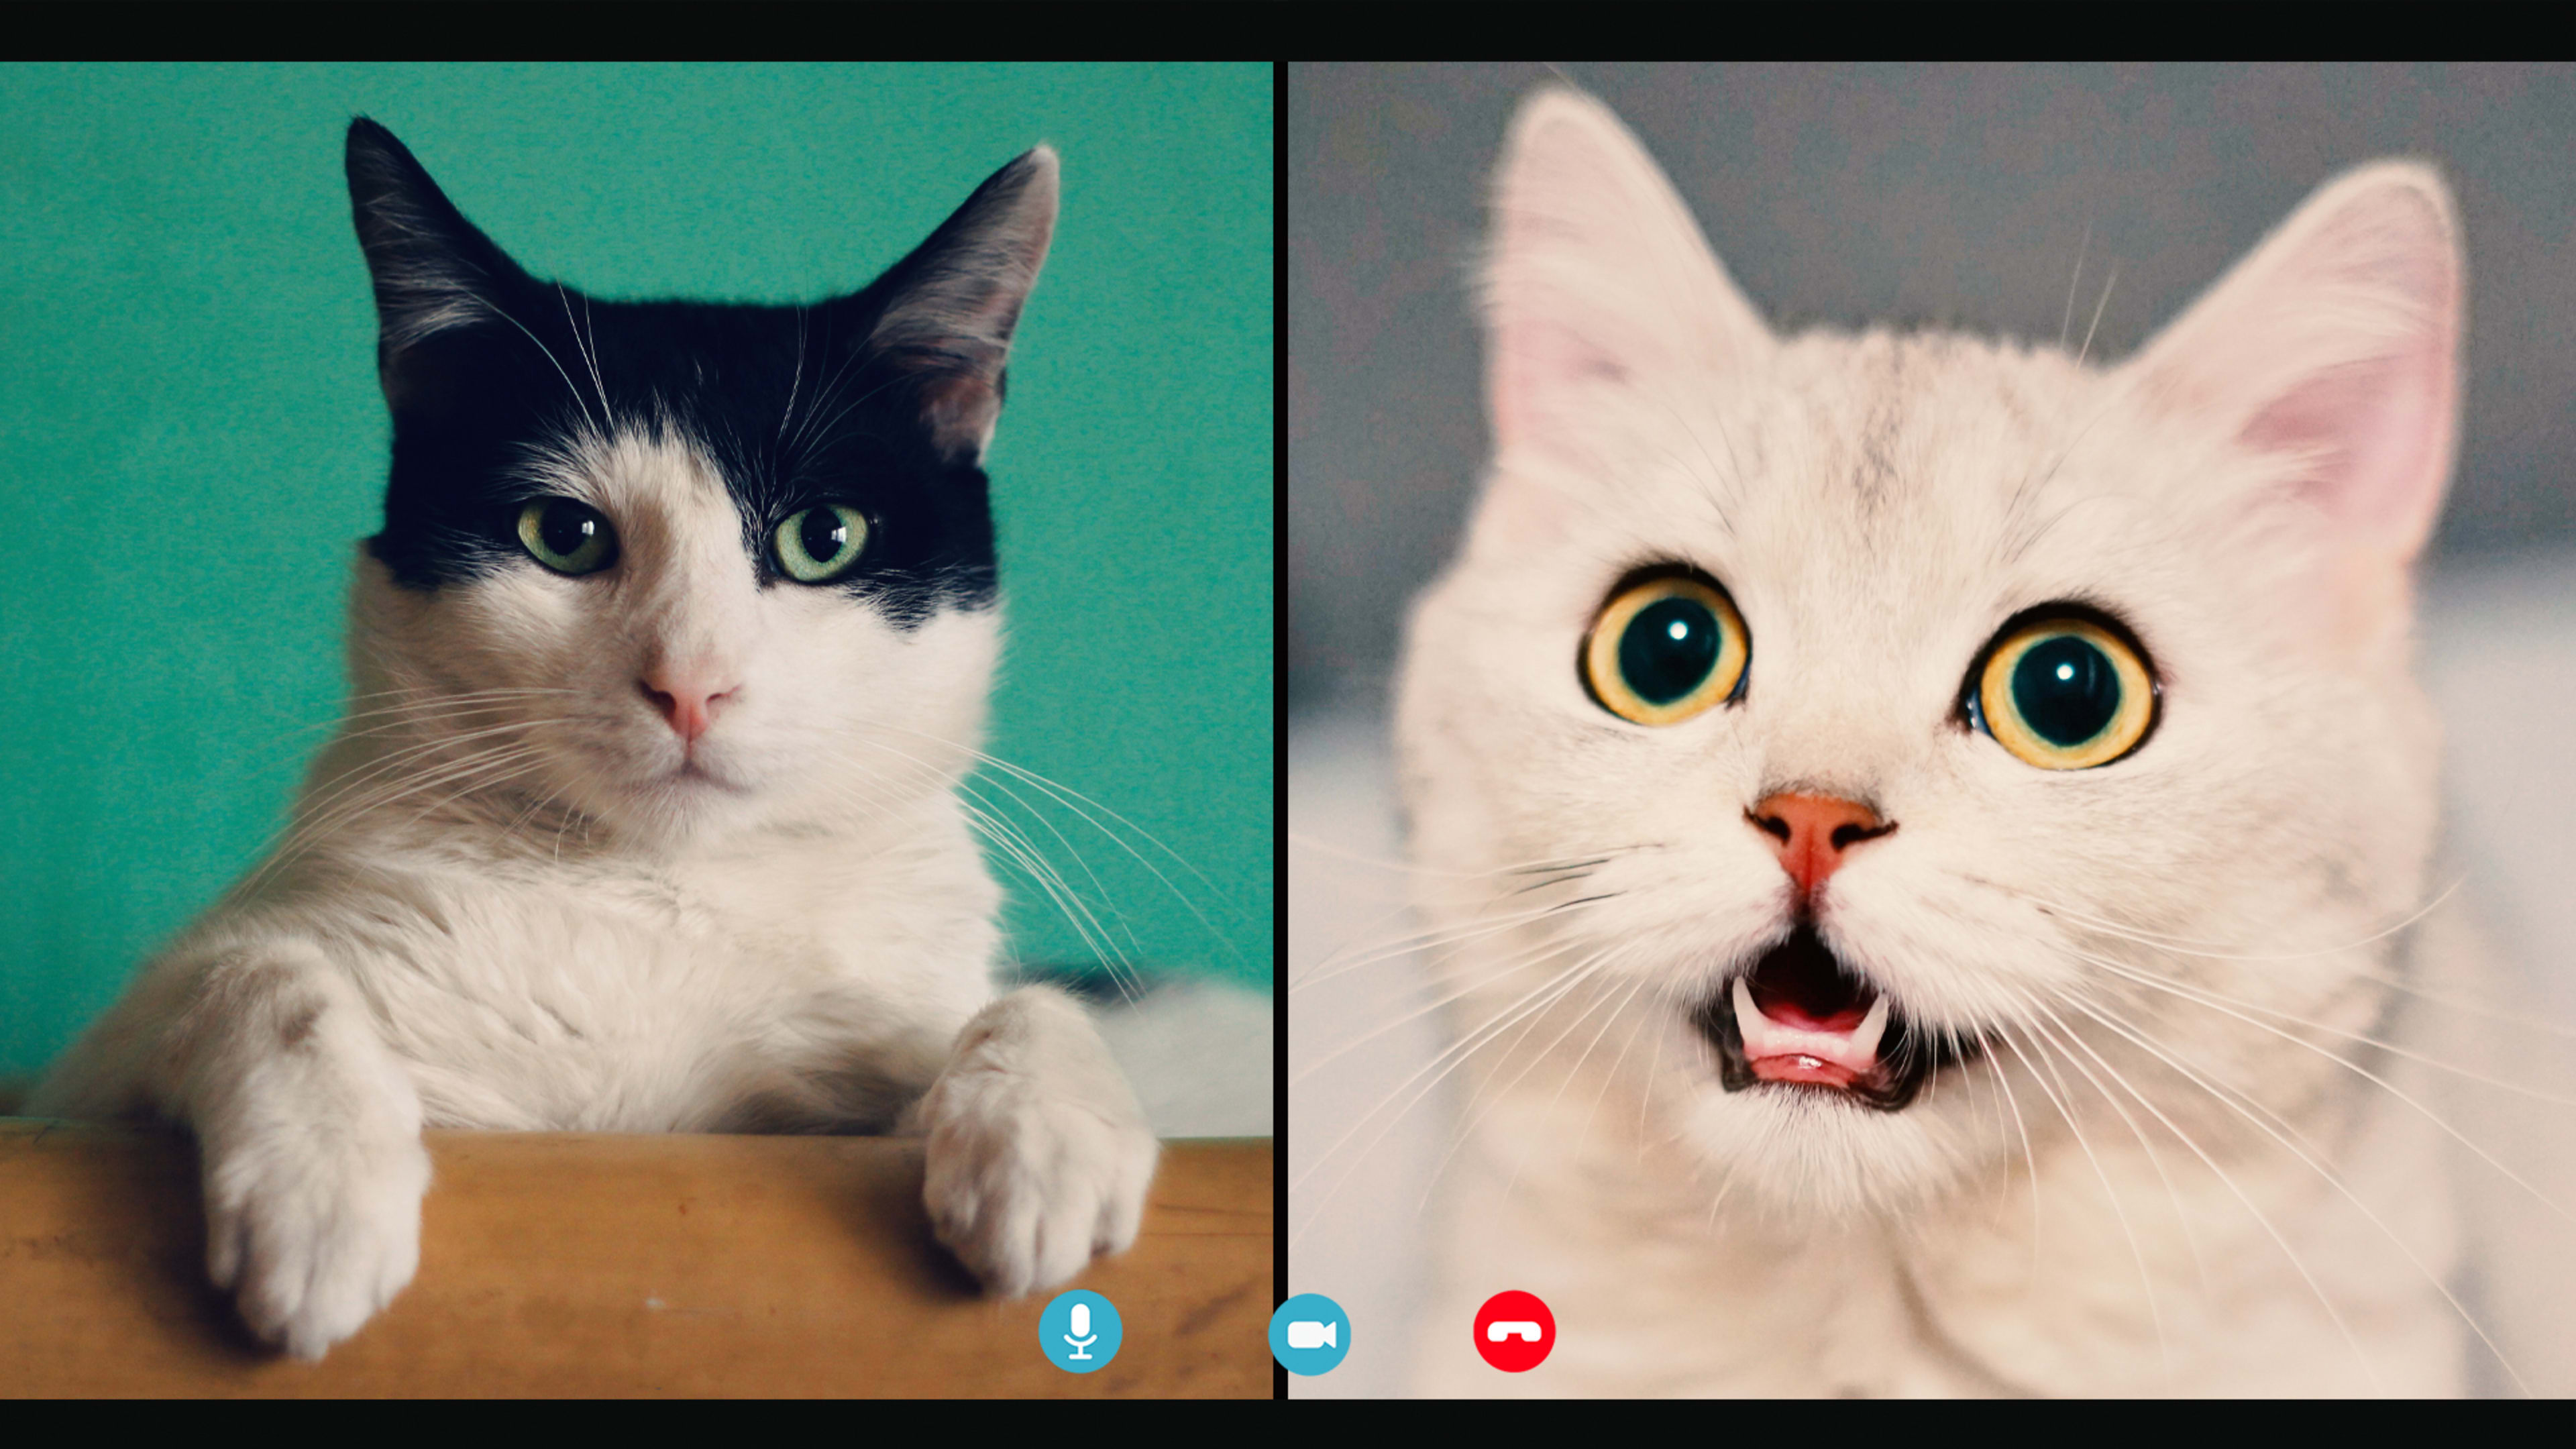 Still can’t find that lawyer’s viral cat filter for Zoom? Here’s why